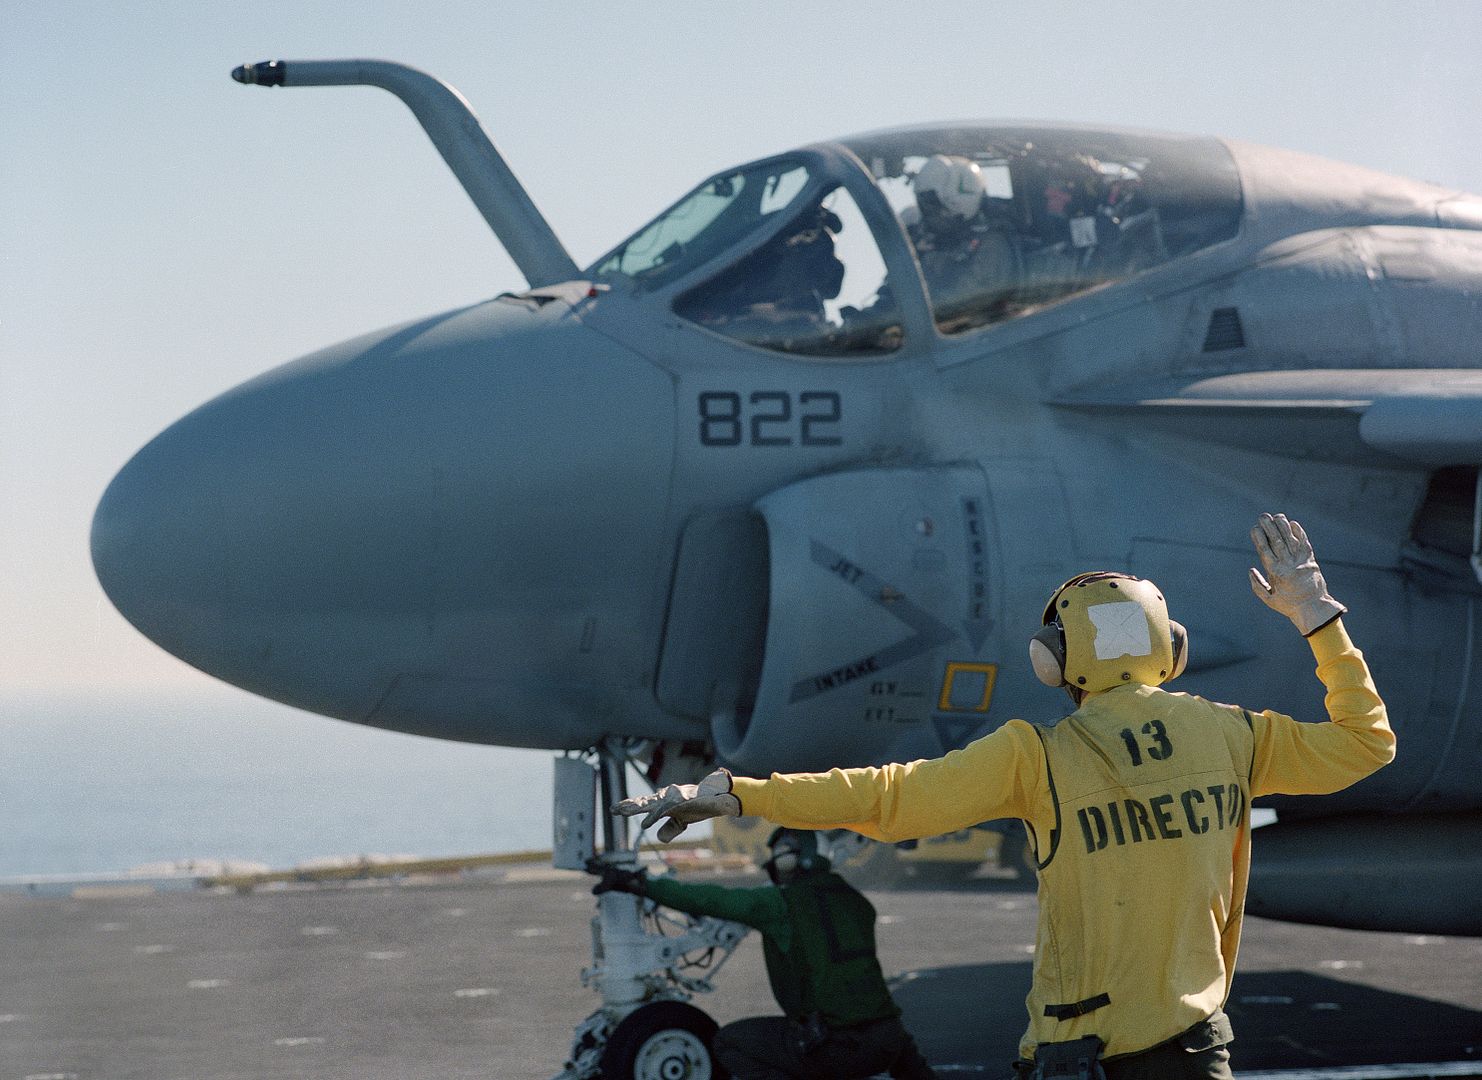 A Plane Director Signals To An A 6E Intruder Aircraft On A Catapult During Flight Operations Aboard The Nuclear Powered Aircraft Carrier USS CARL VINSON